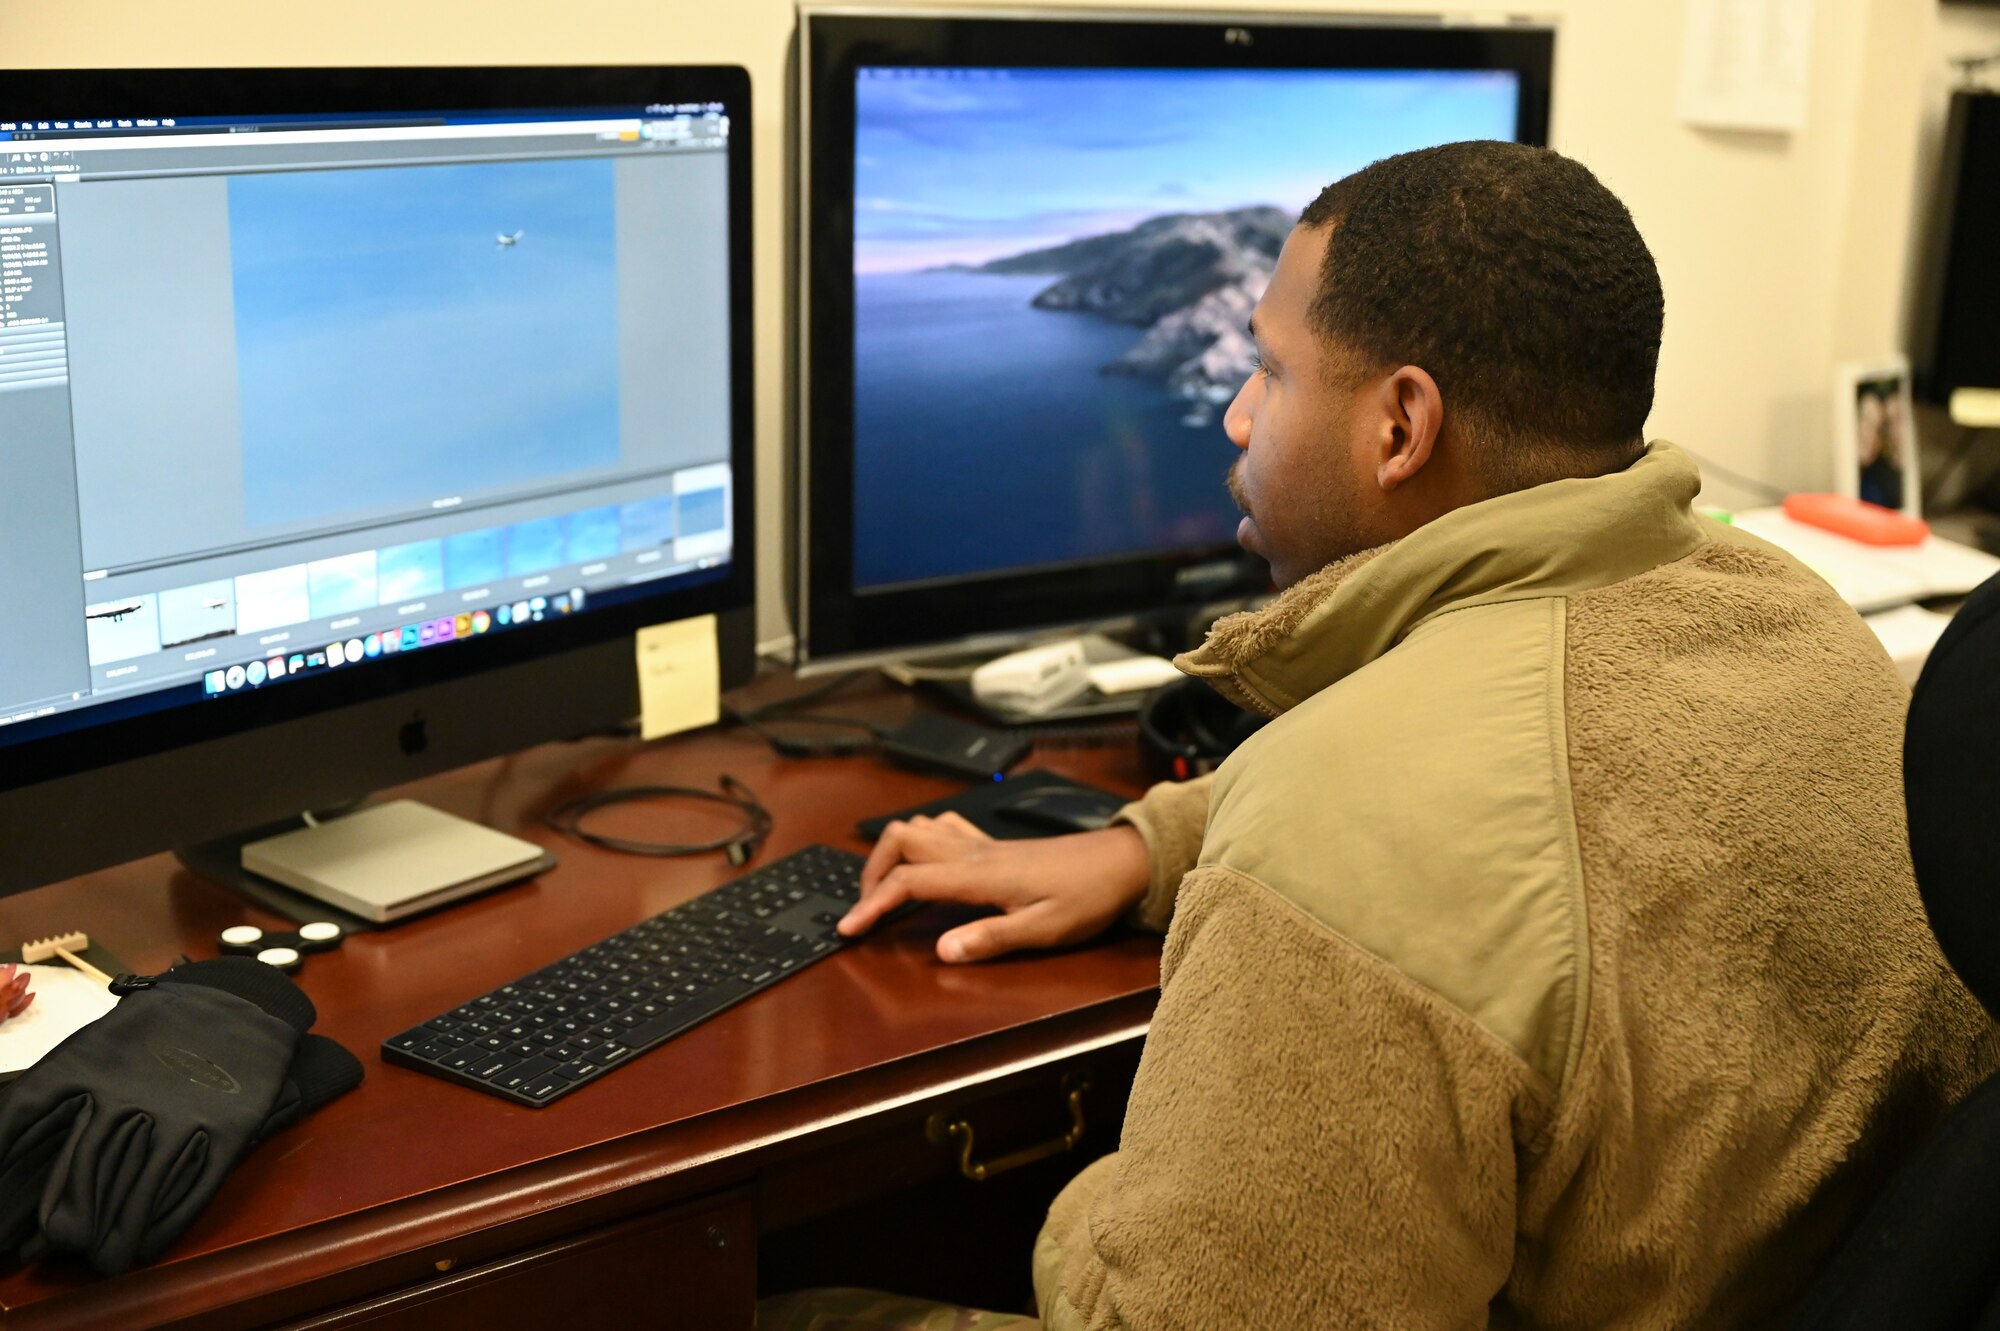 U.S. Air Force Senior Airman David Richardson, 14th Operations Support squadron aircrew flight equipment technician, looks through his recently captured photos on Microsoft Bridge Nov. 30, 2020, on Columbus Air Force Base, Miss. The Department of Defense uses a variety of editing software to include Microsoft Bridge, Premier, Photoshop and InDesign as an effort to ensure quality products are being produced. (U.S. Air Force photo by Airman 1st Class Jessica Williams)